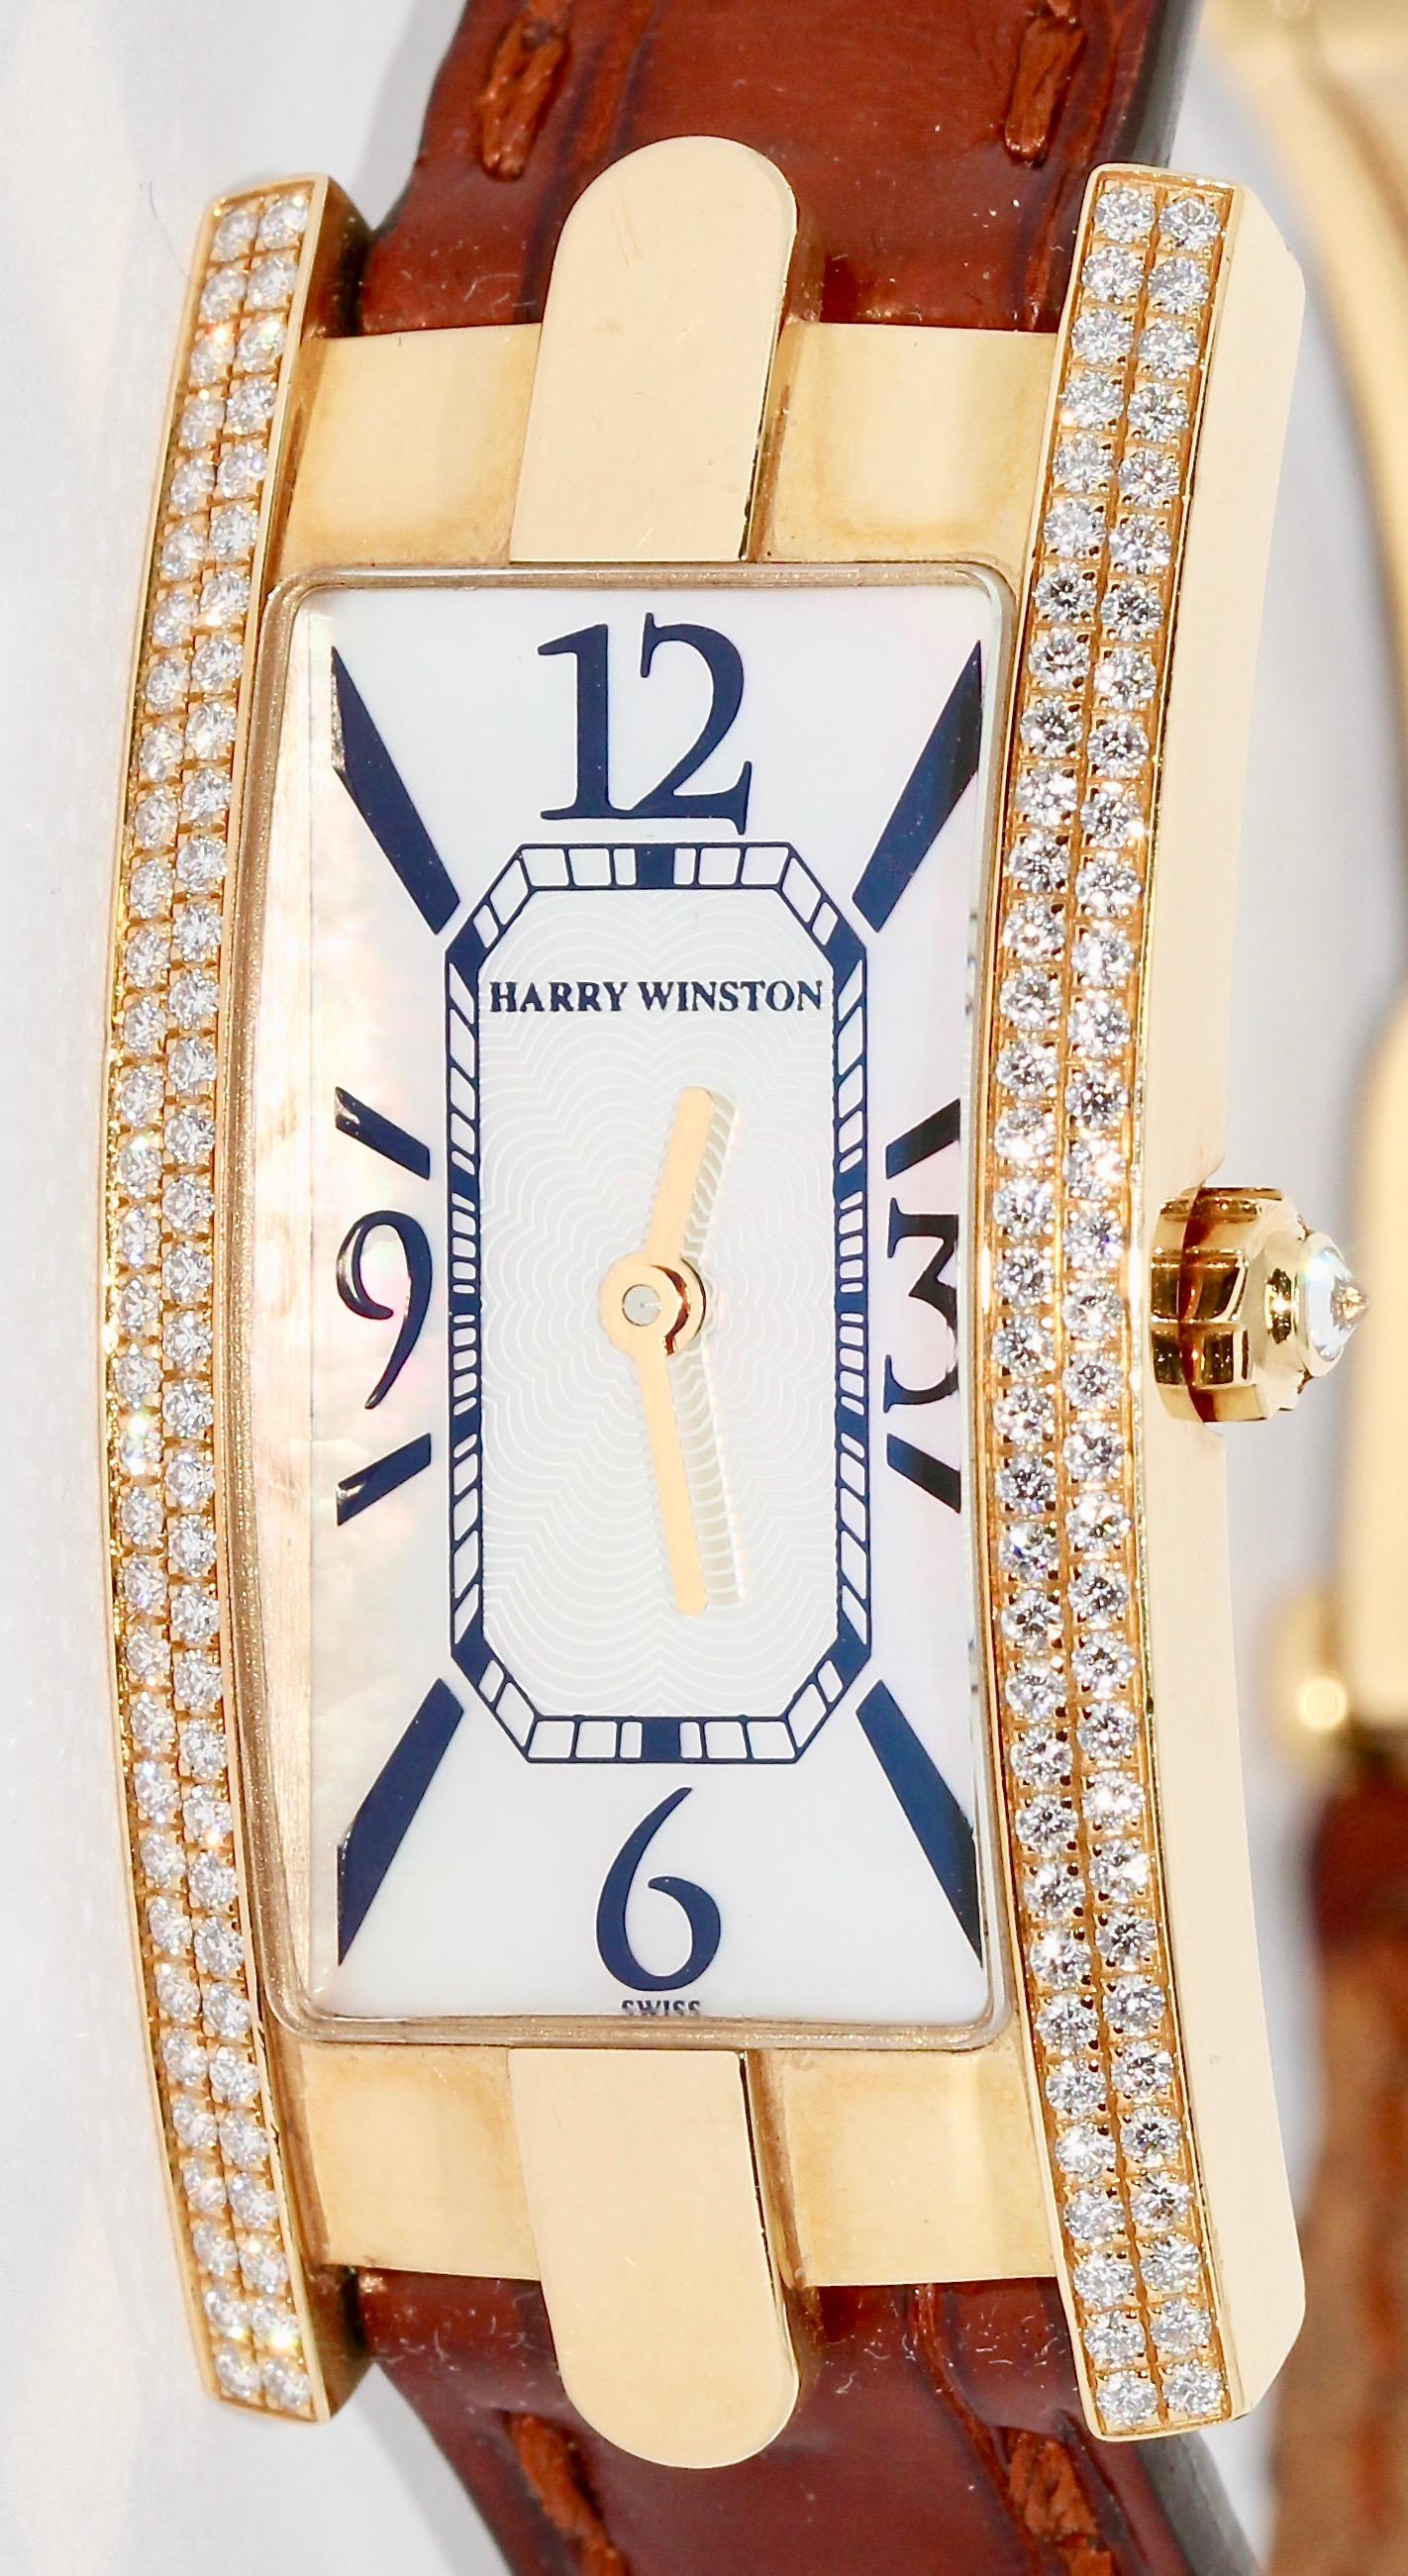 Harry Winston Lady Avenue, Ladies Wrist Watch, with Diamonds and Mother of Pearl Dial.

Case and original HW clasp in 18 Karat gold.
Original HW leather strap.

The watch will be overhauled before shipment! (New battery etc.)

Including certificate